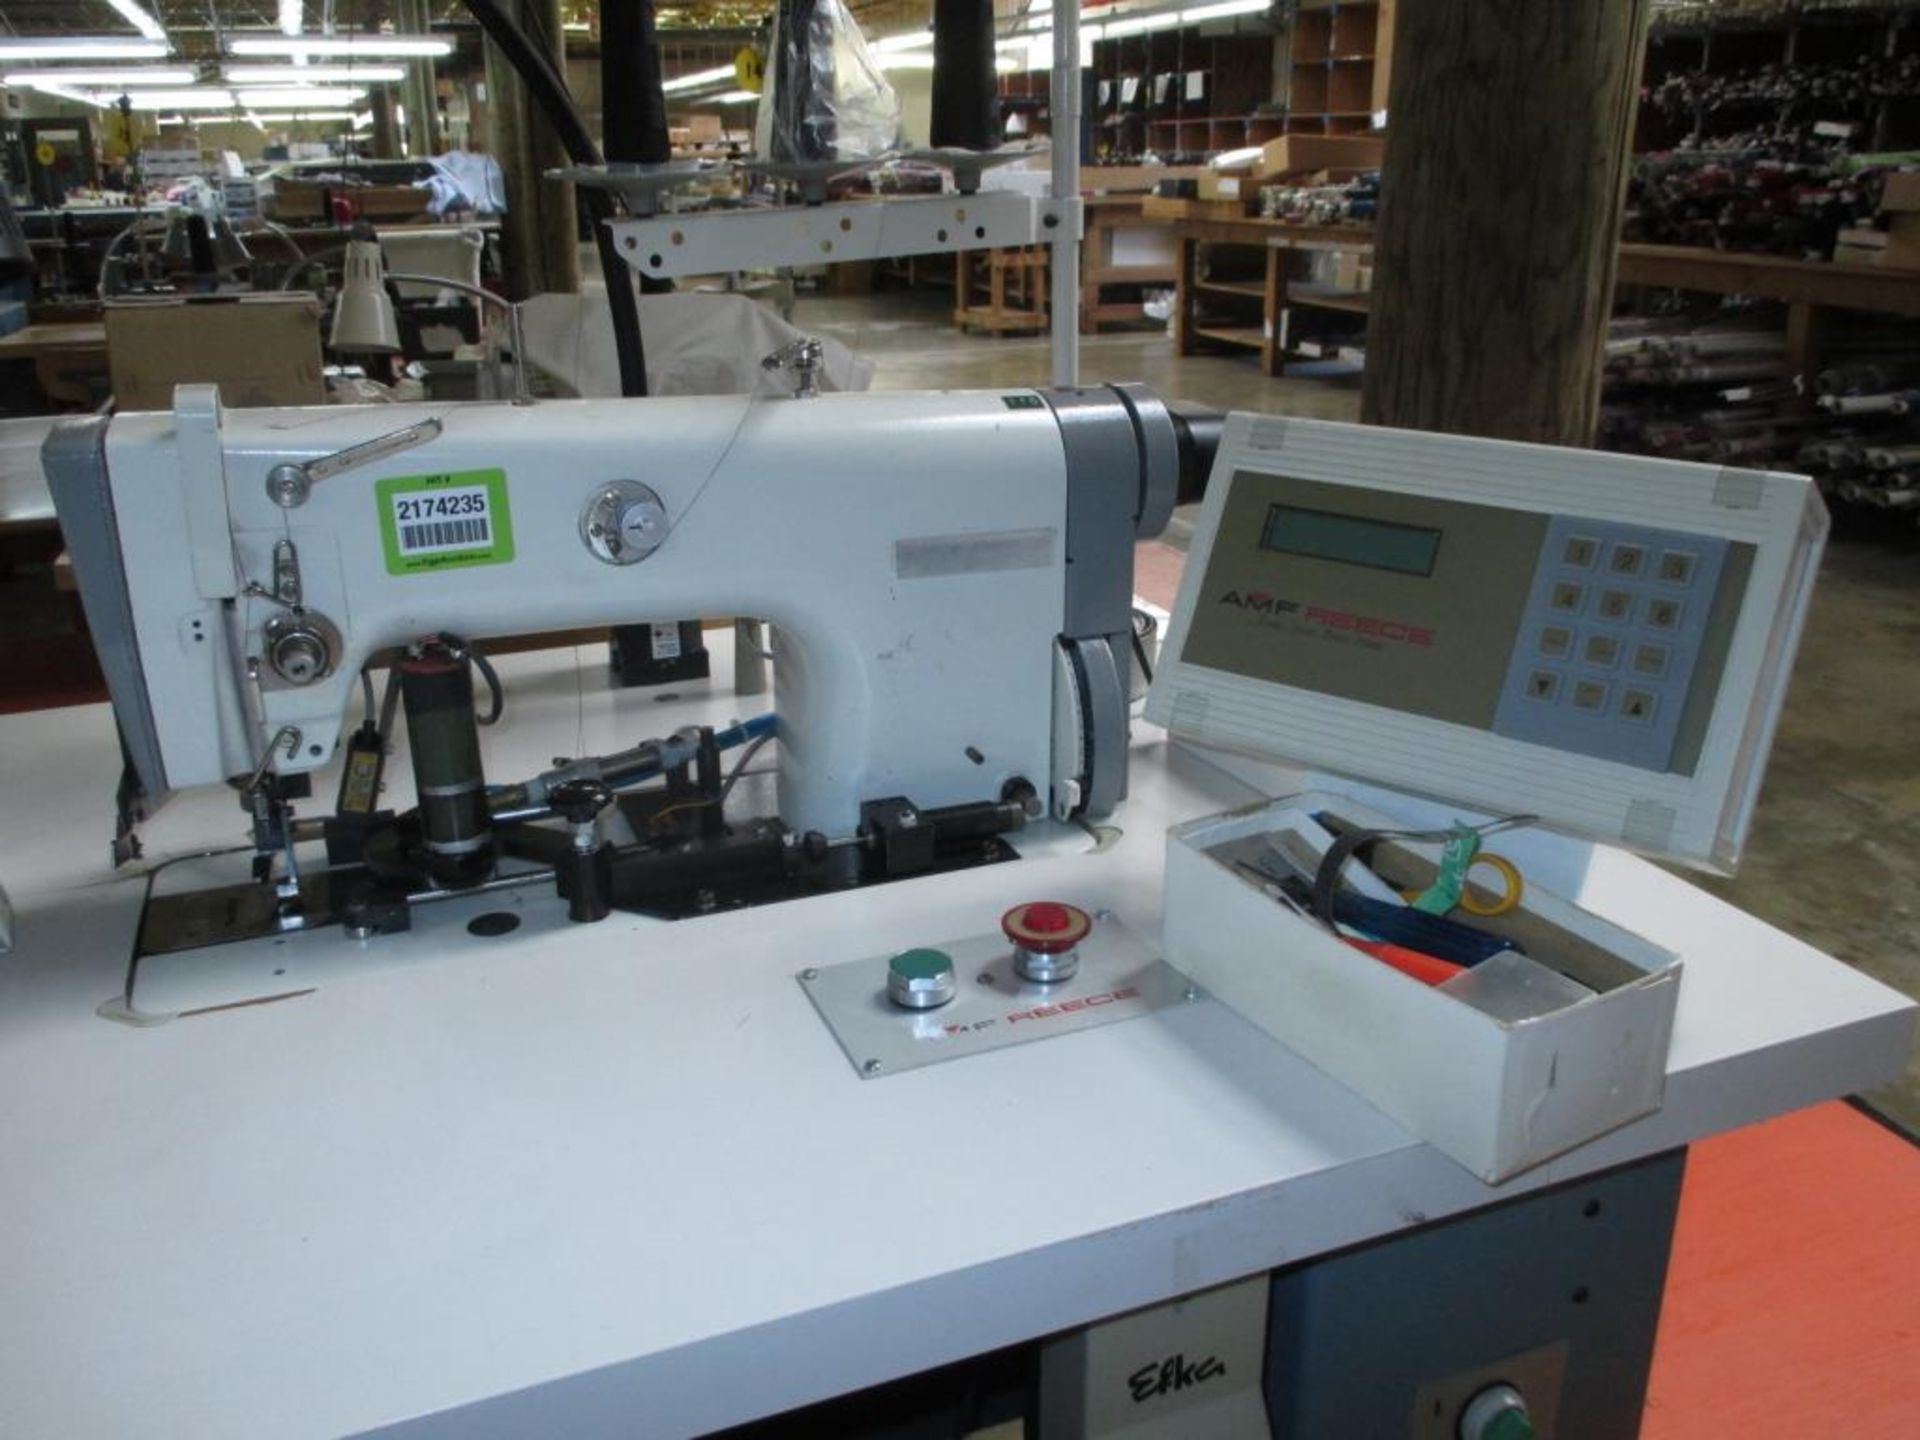 Tie Tipping Sewing Machine. AMF Reece Custom Template Tie Tipping Sewing Machine. HIT# 2174235. - Image 2 of 5